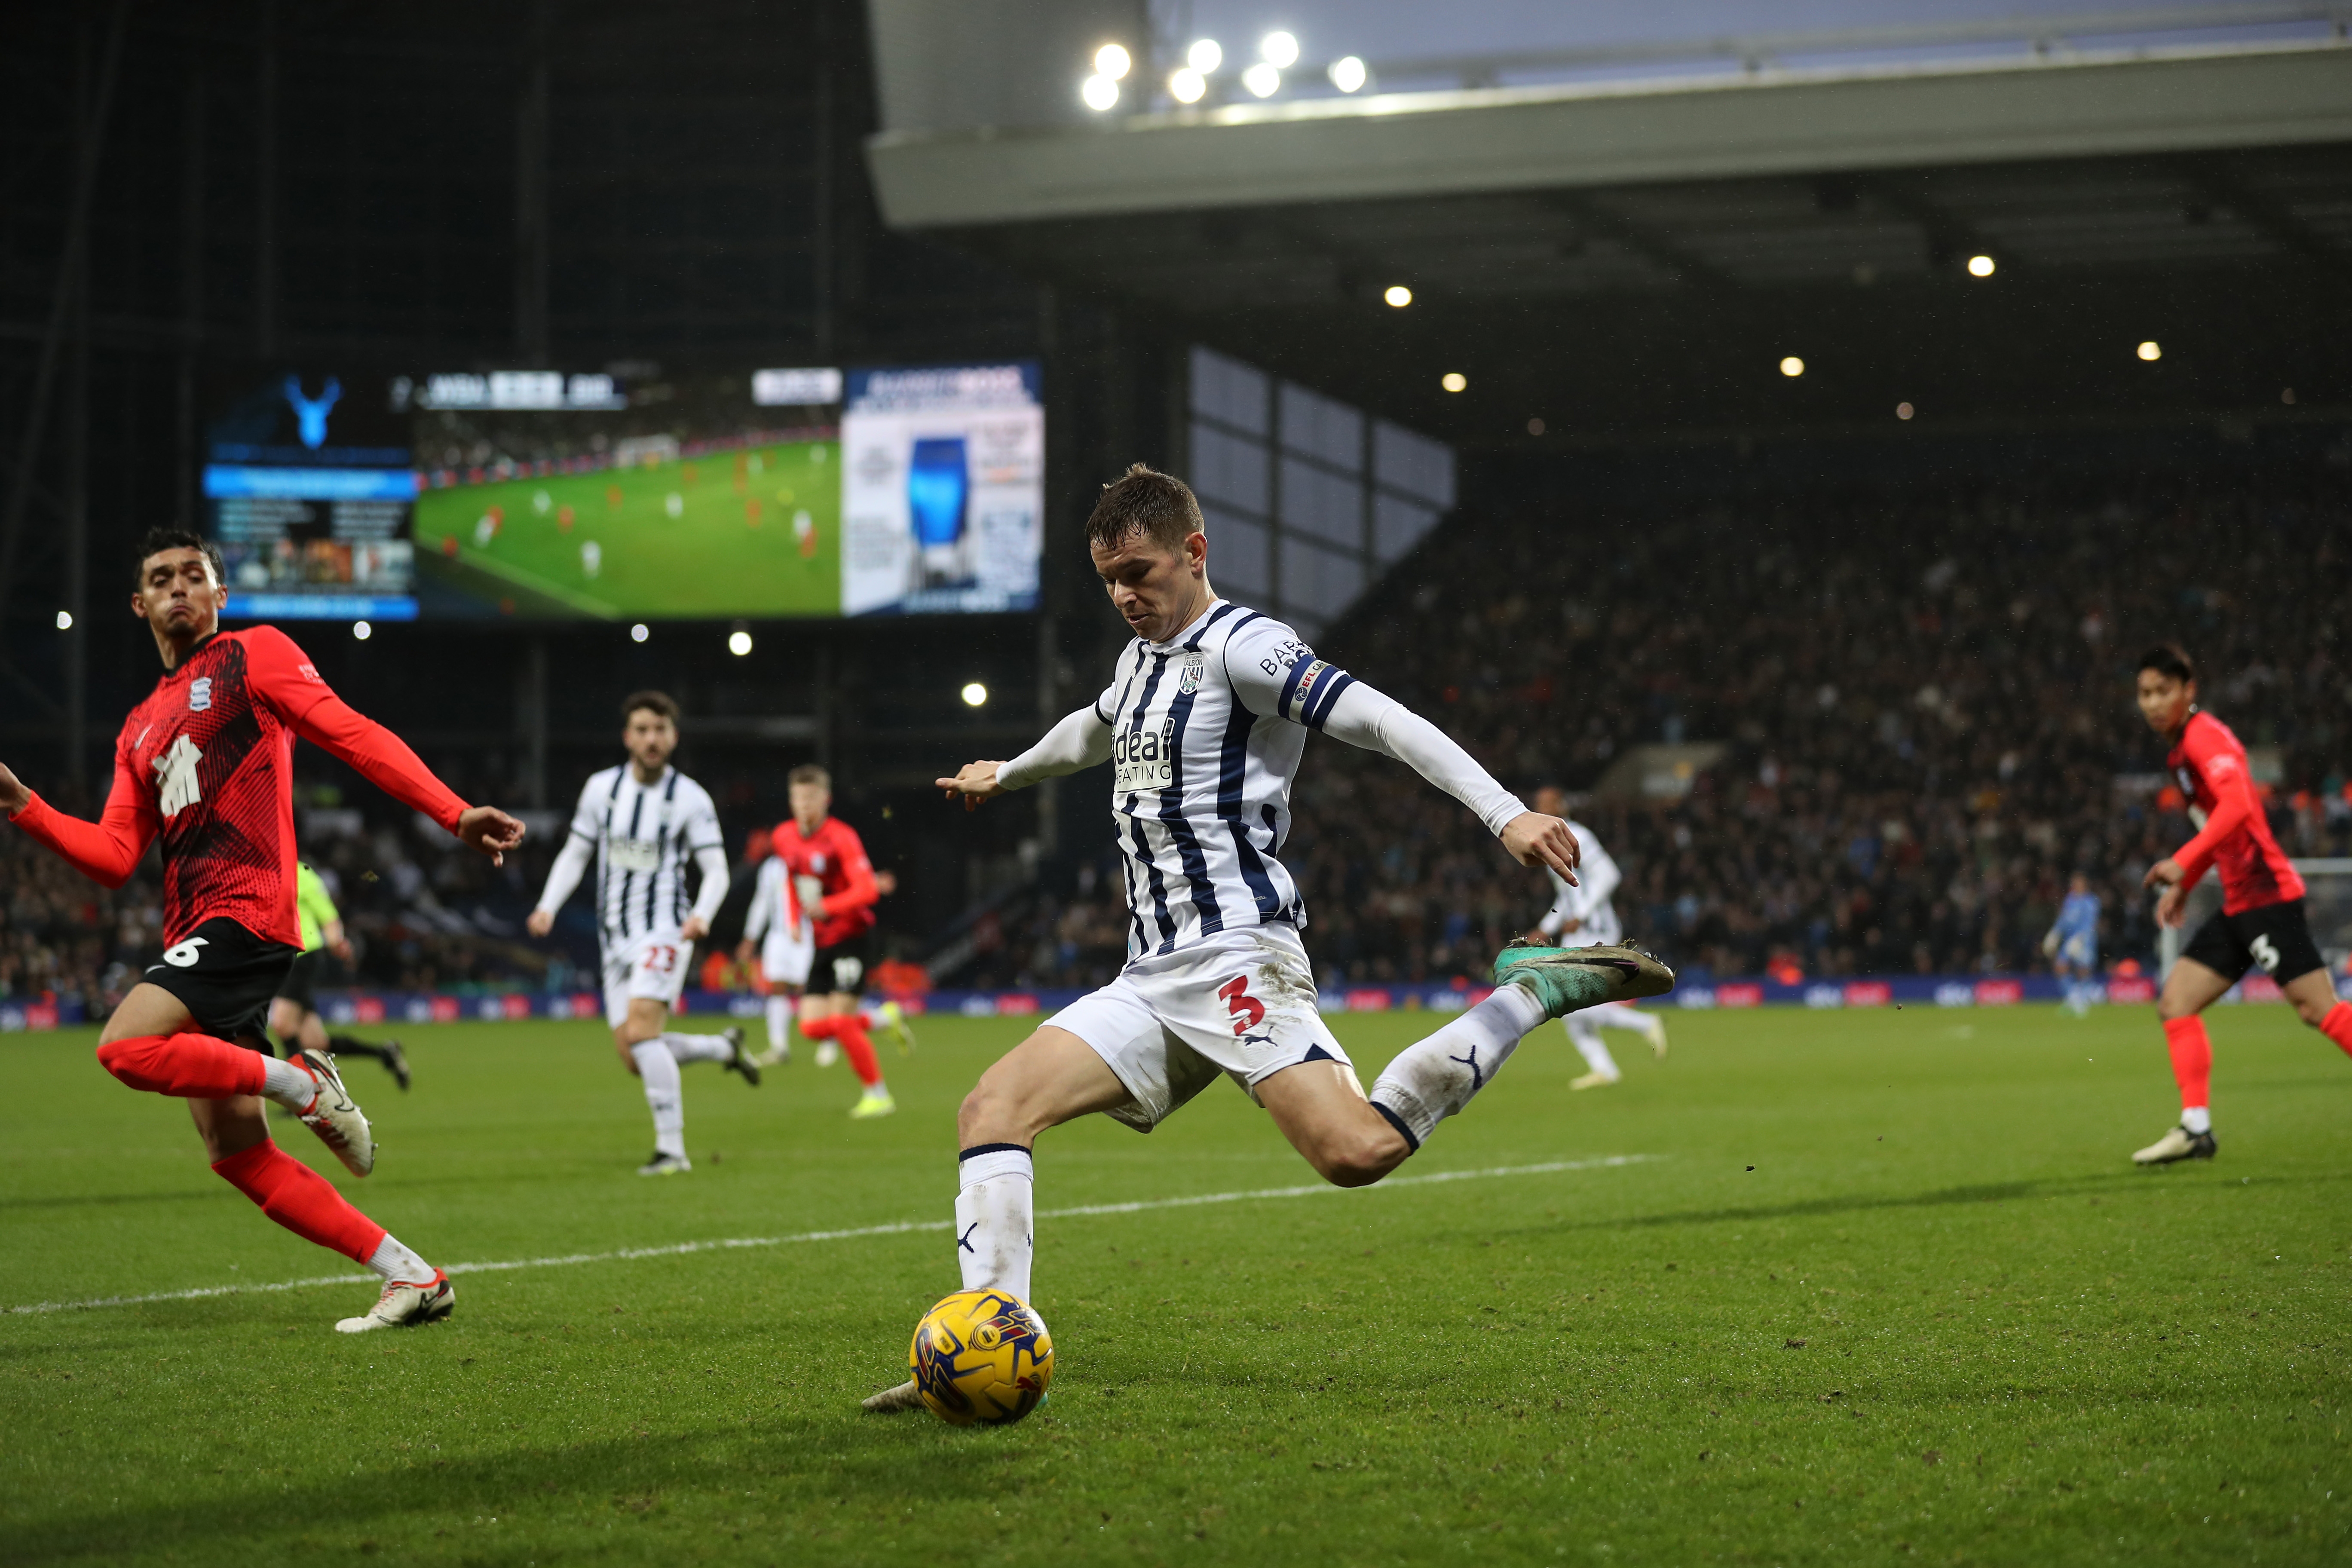 Conor Townsend crosses the ball against Blues